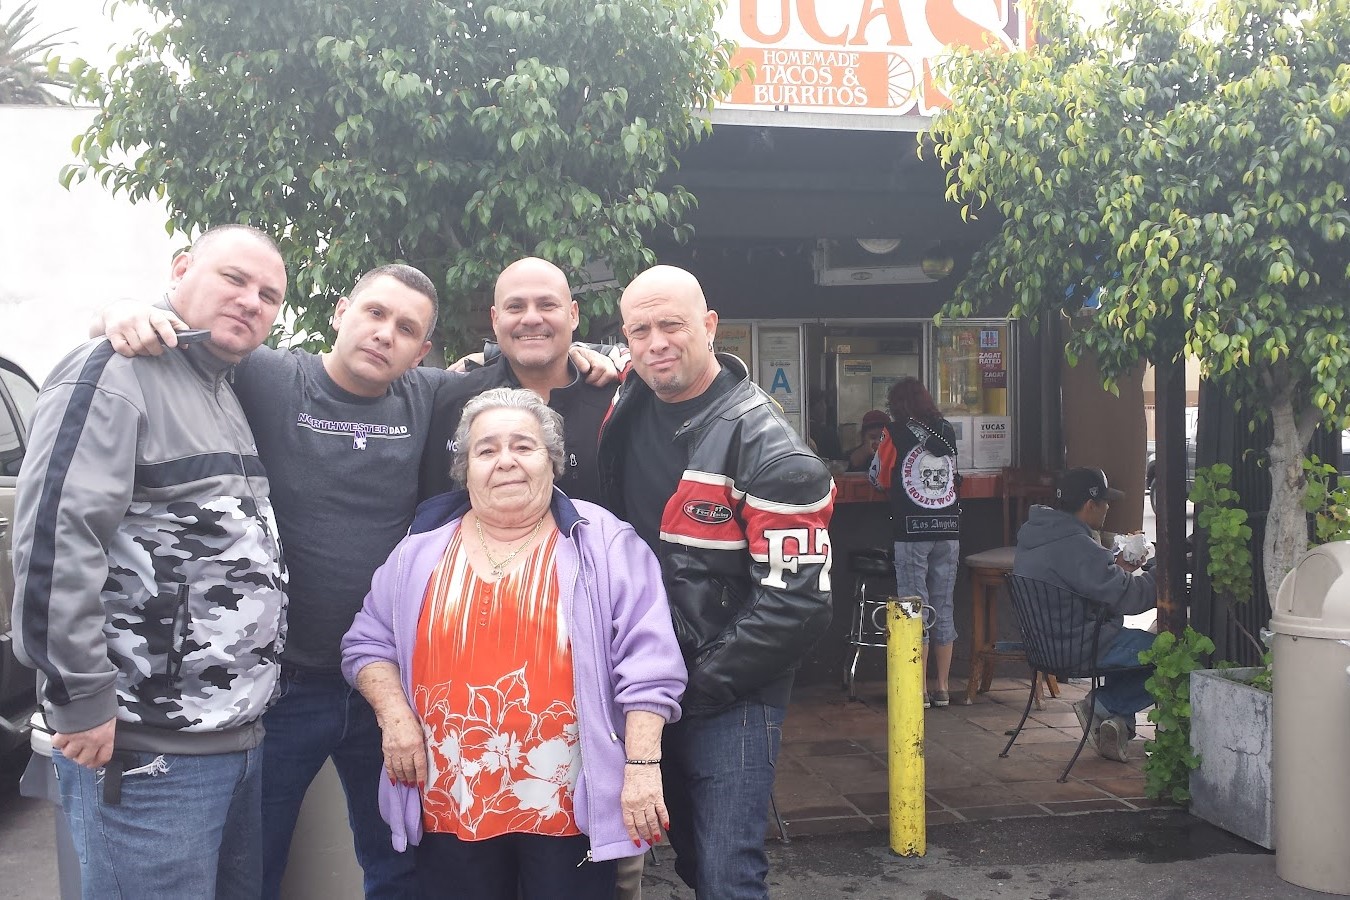 Yuca's Restaurant - Owner with customers